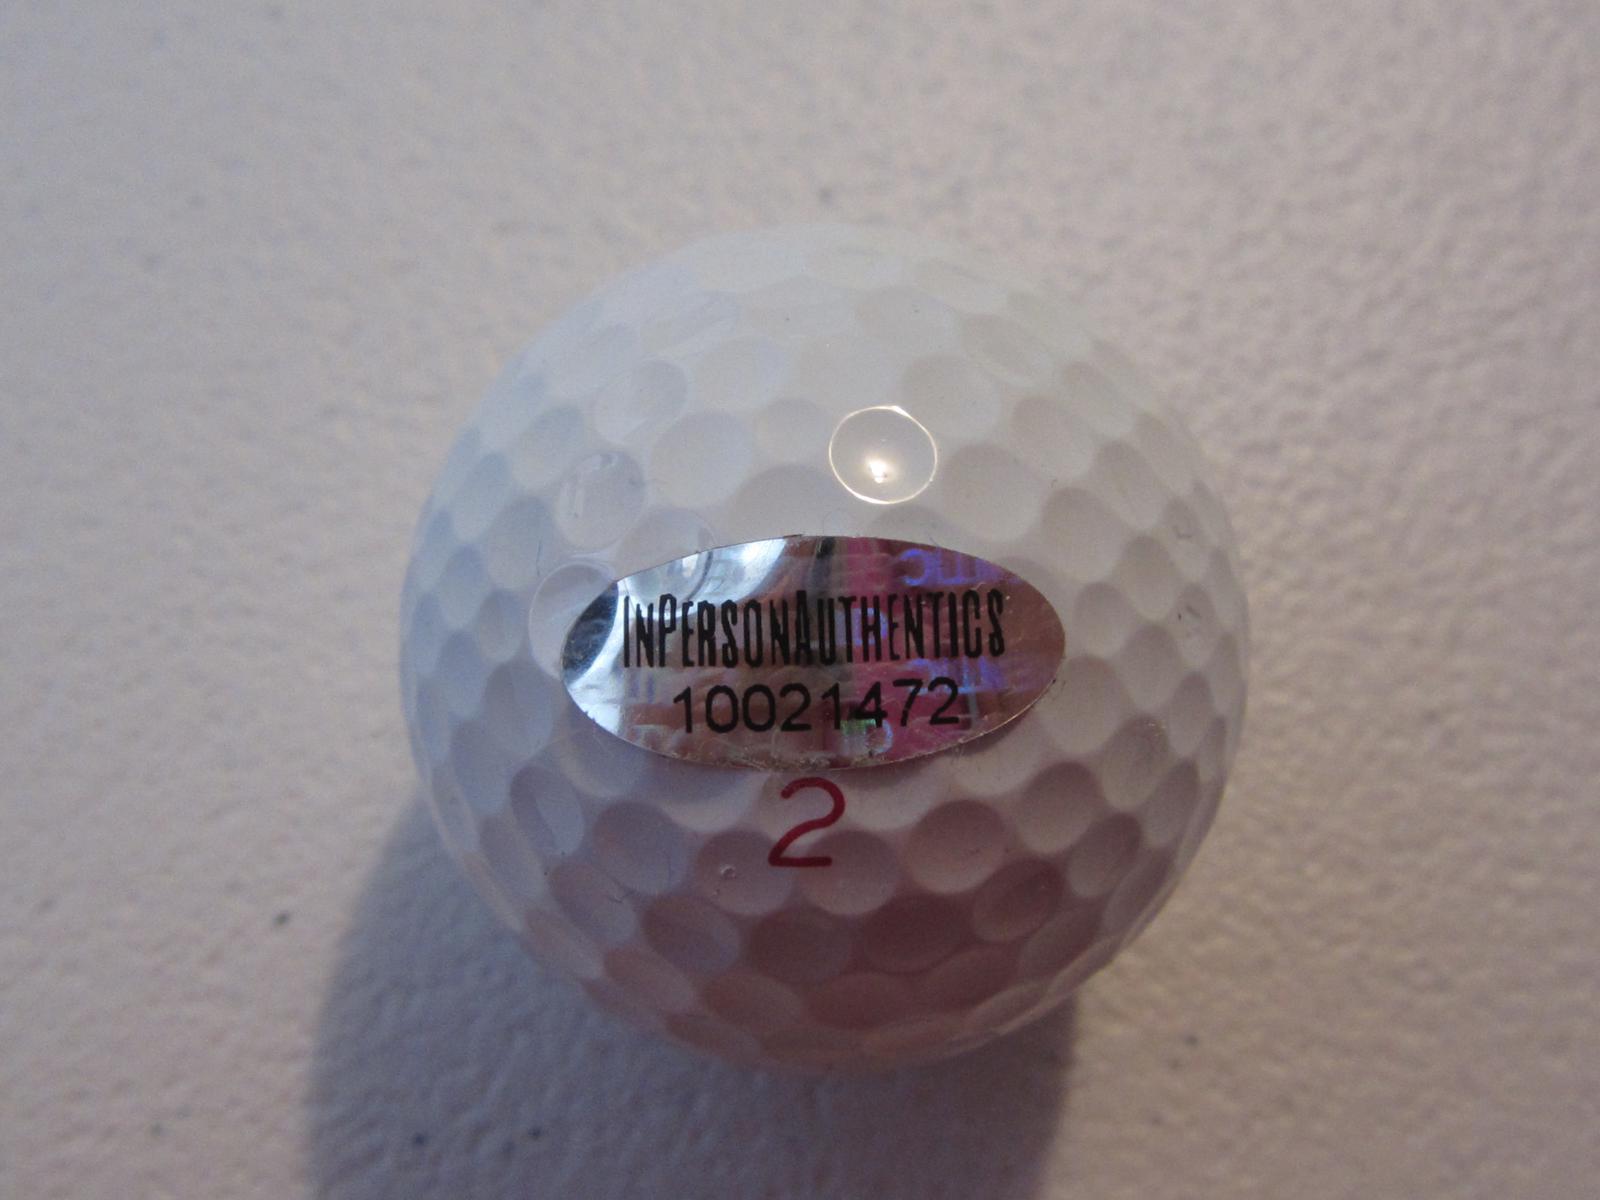 TIGER WOODS SIGNED GOLF BALL WITH COA